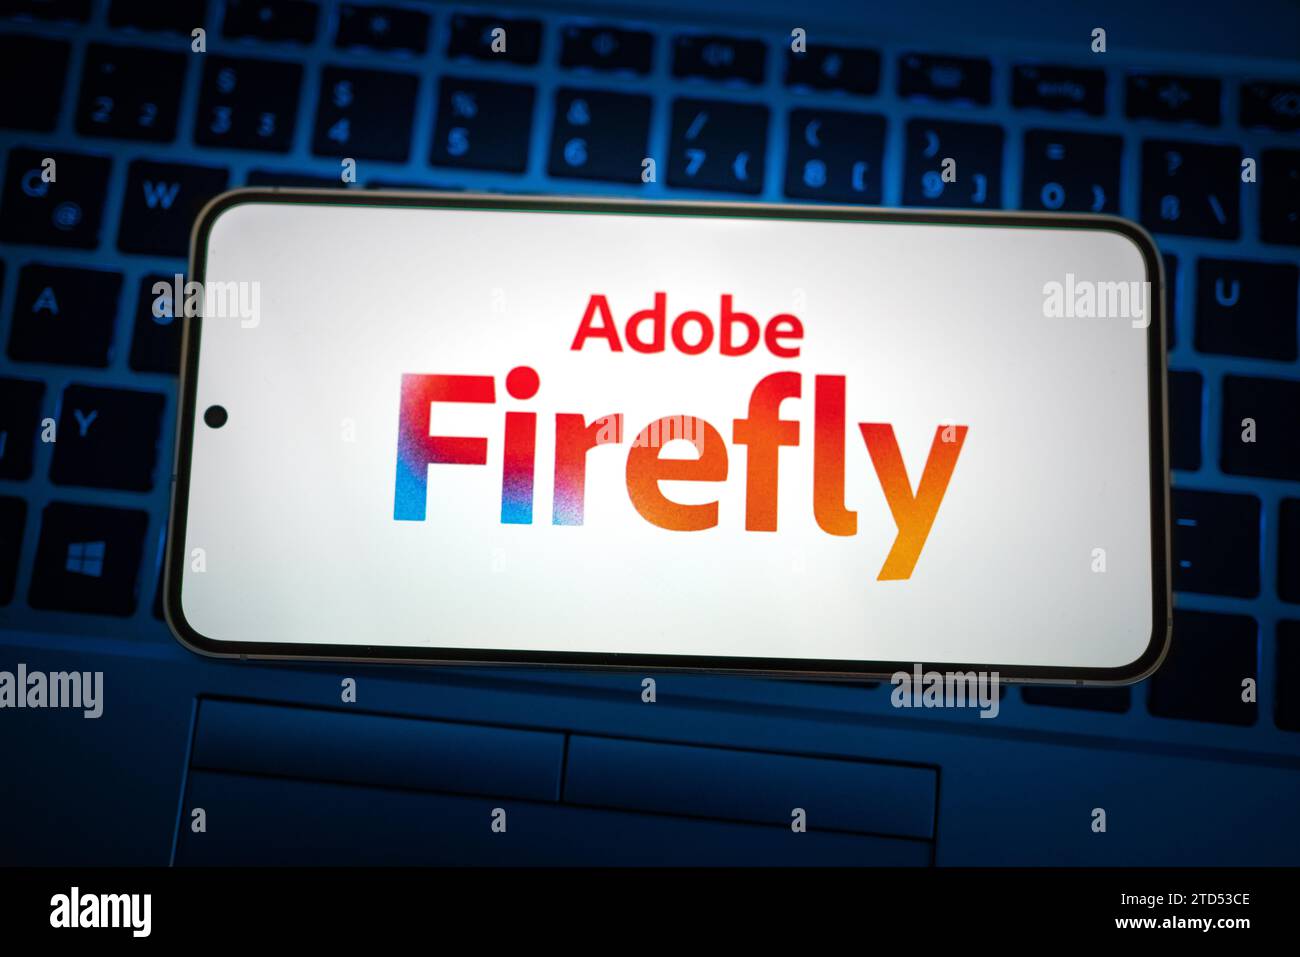 Adobe Firefly a product of Adobe Creative Cloud Stock Photo